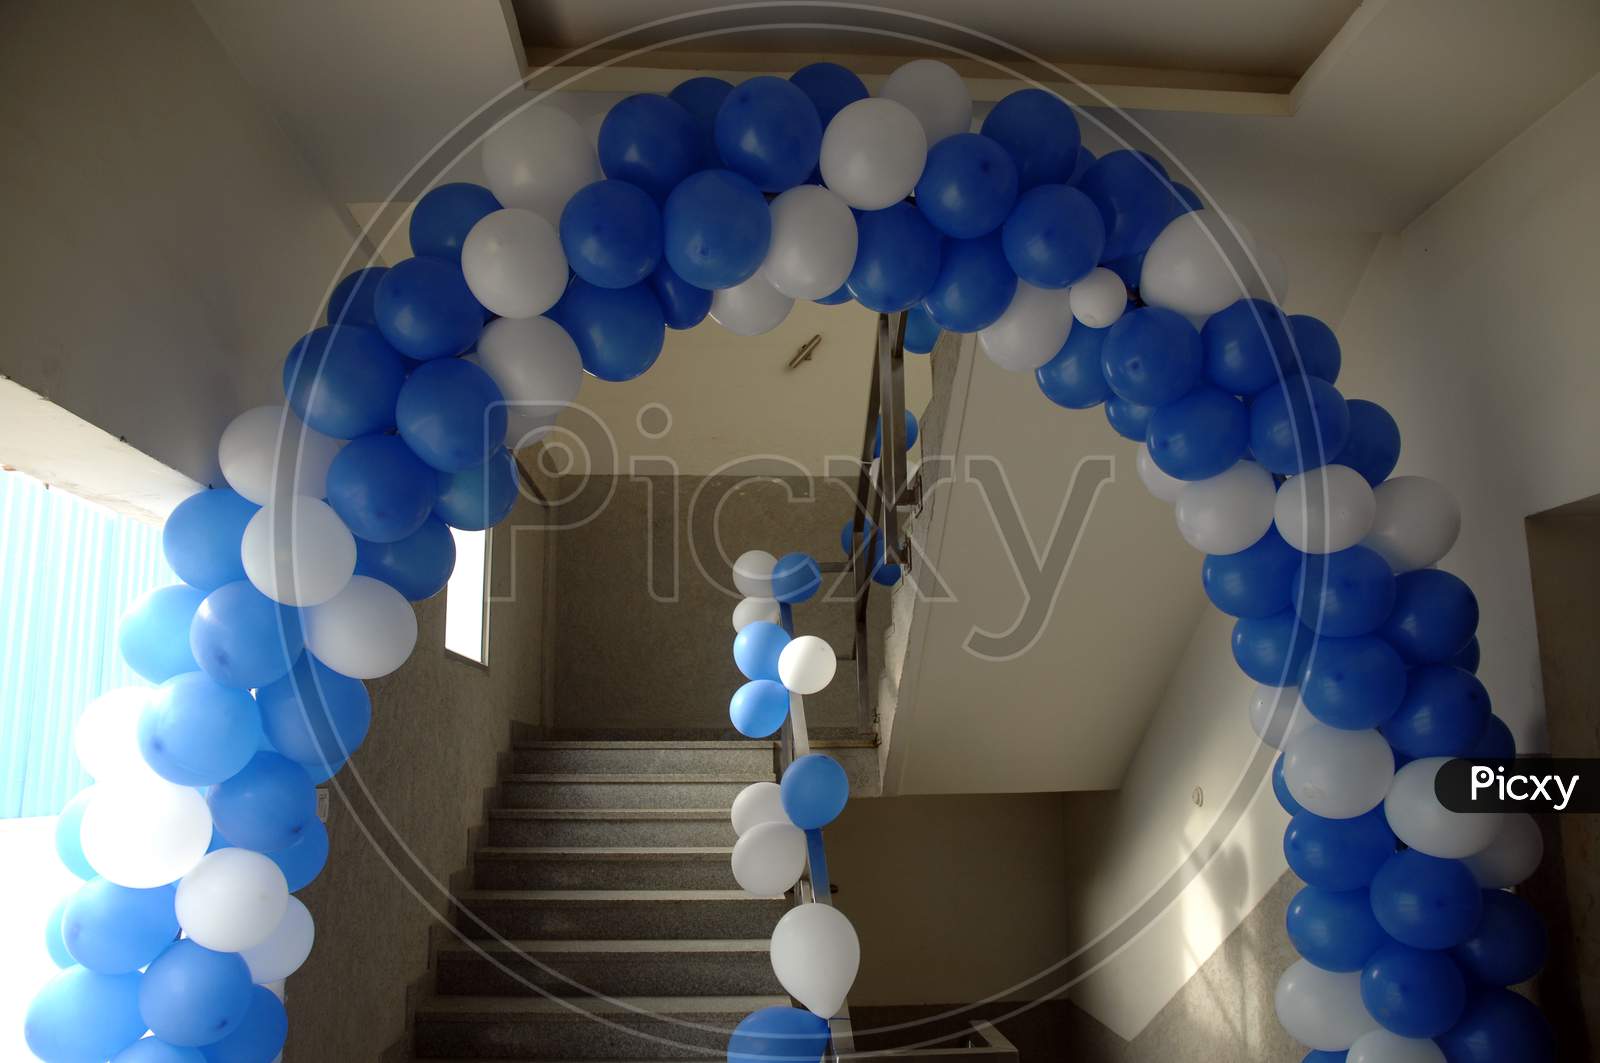 Balloons decorated entrance